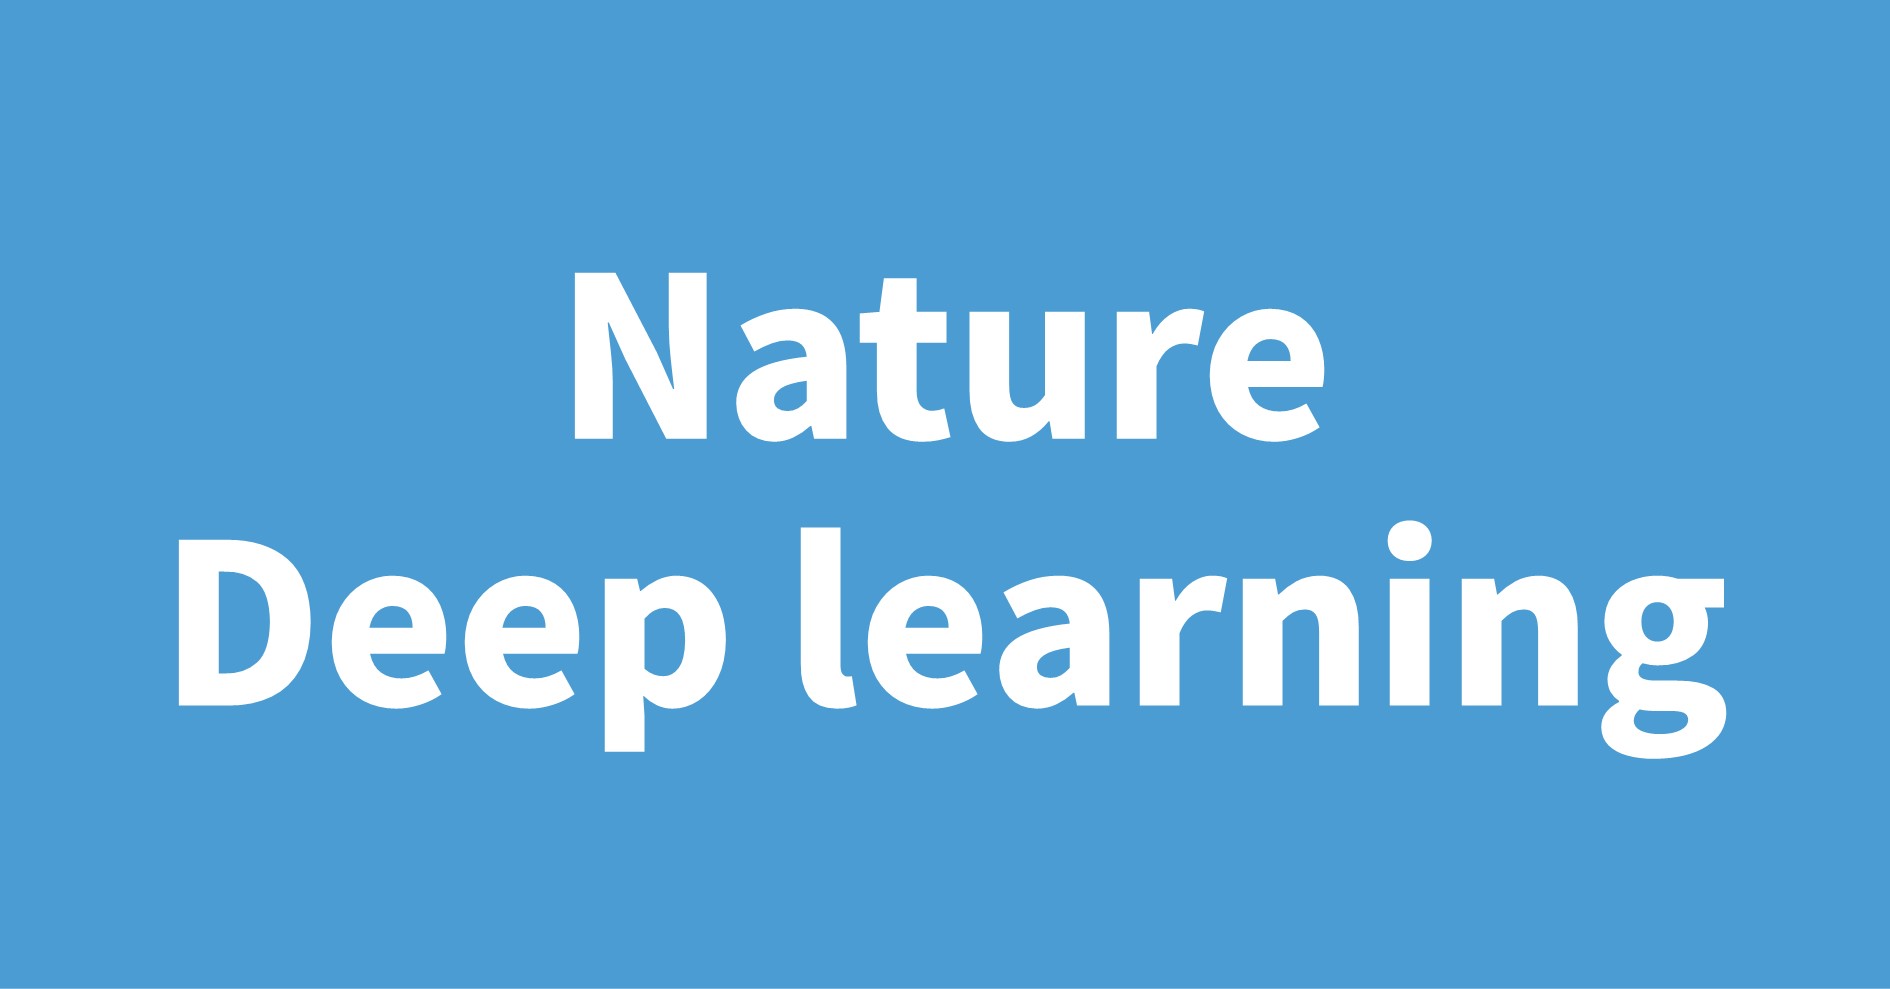 Nature Deep learning